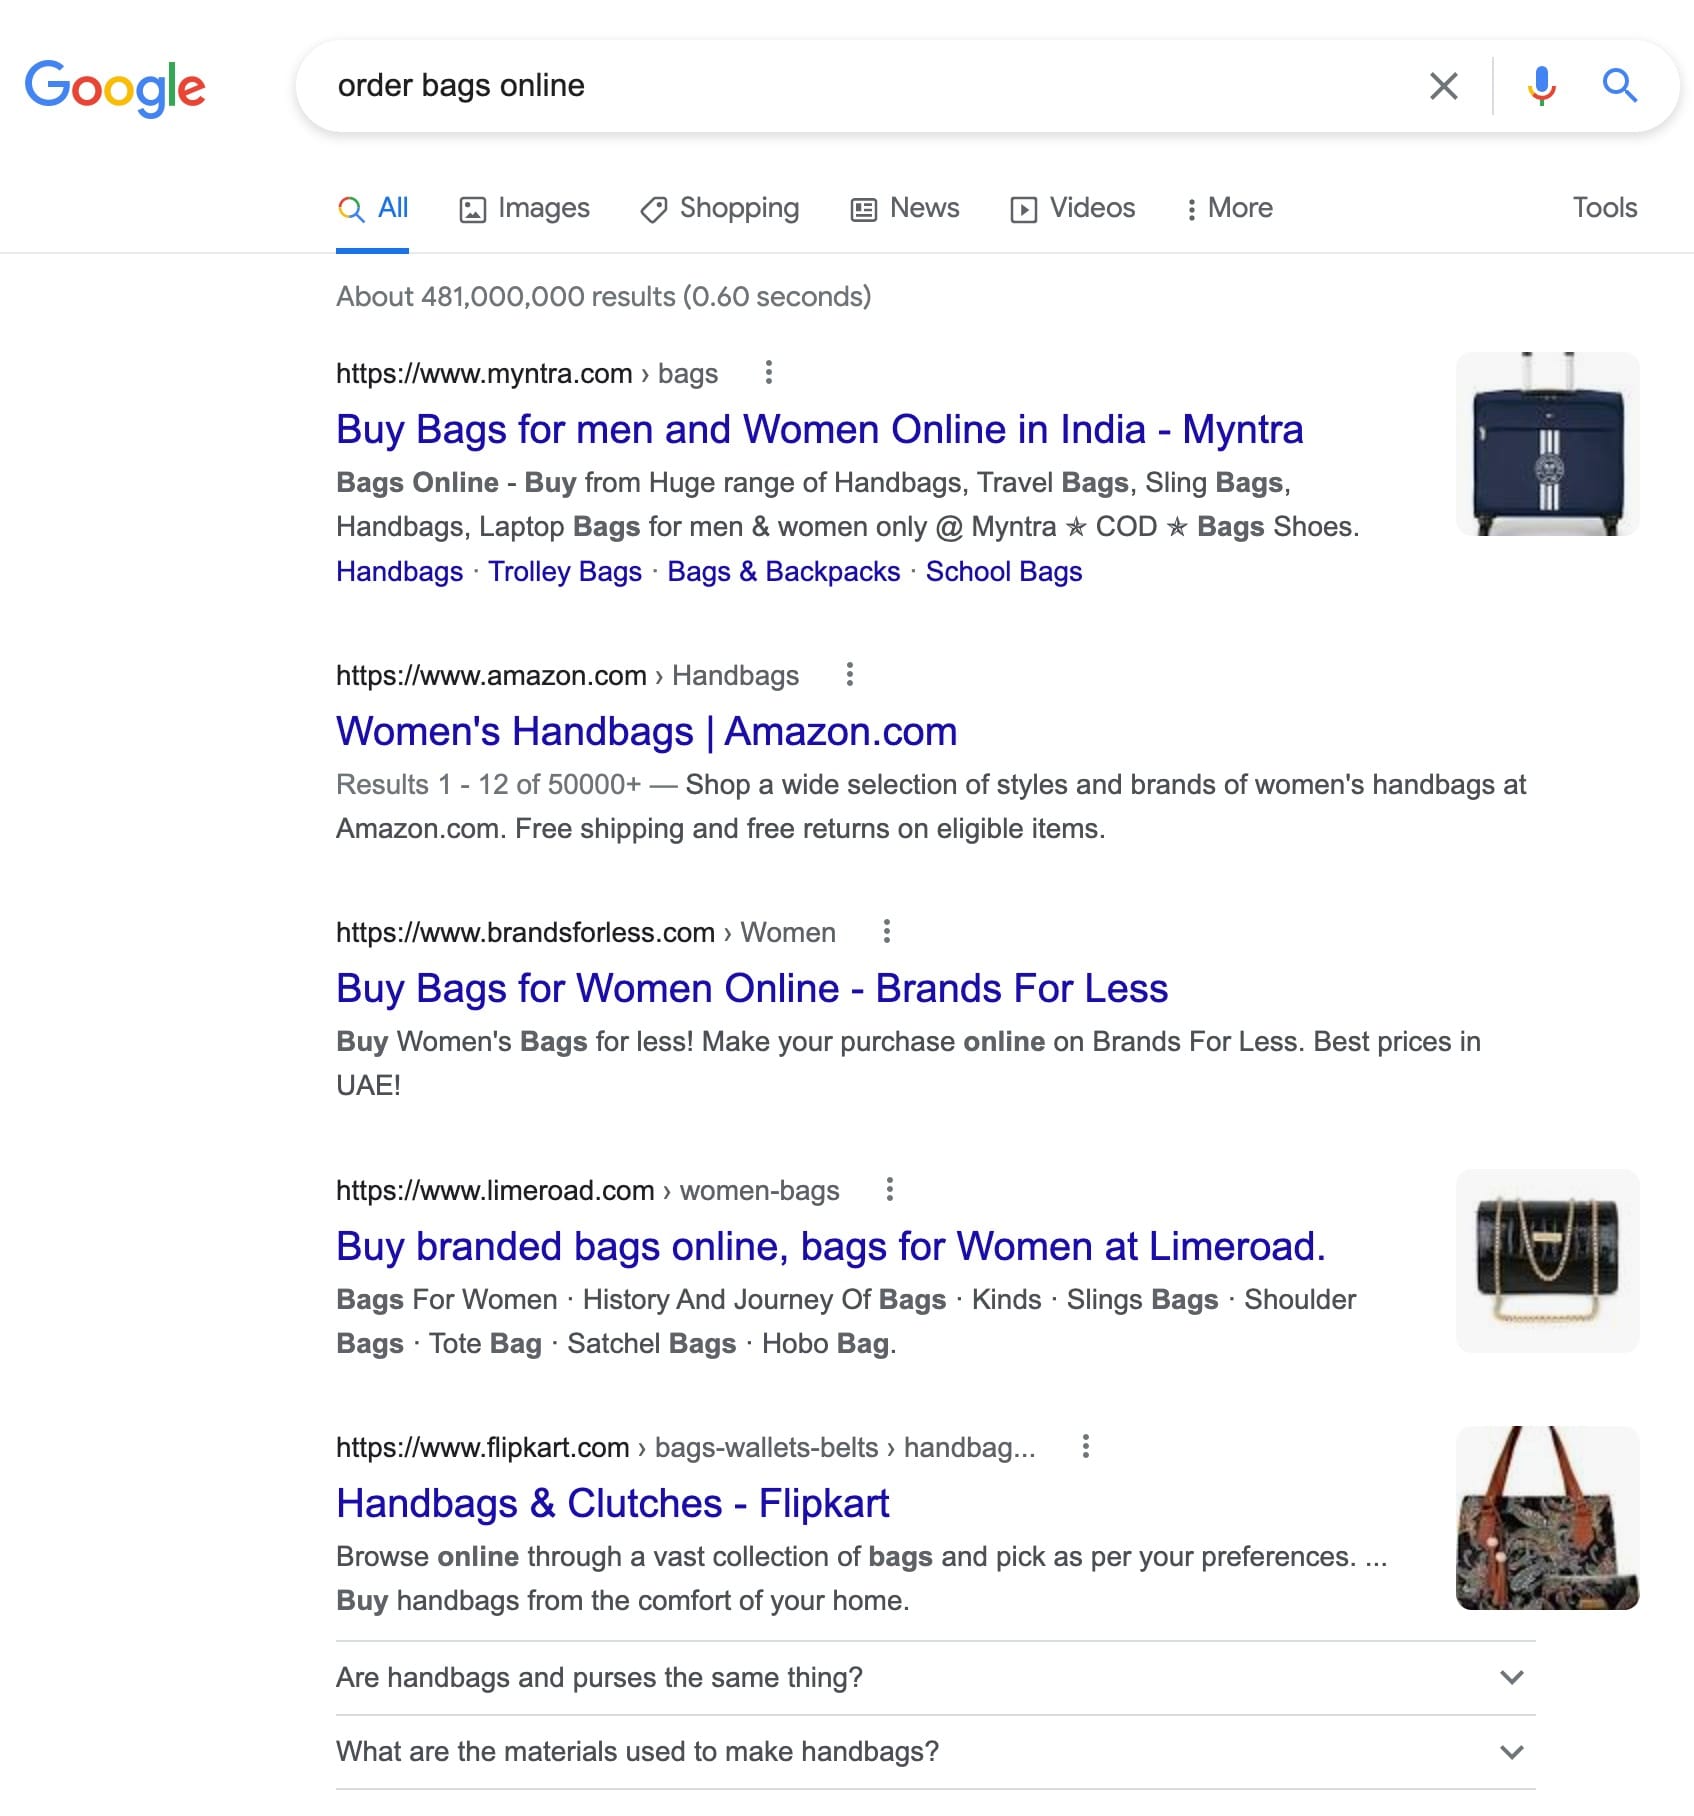 Transactional Search Intent